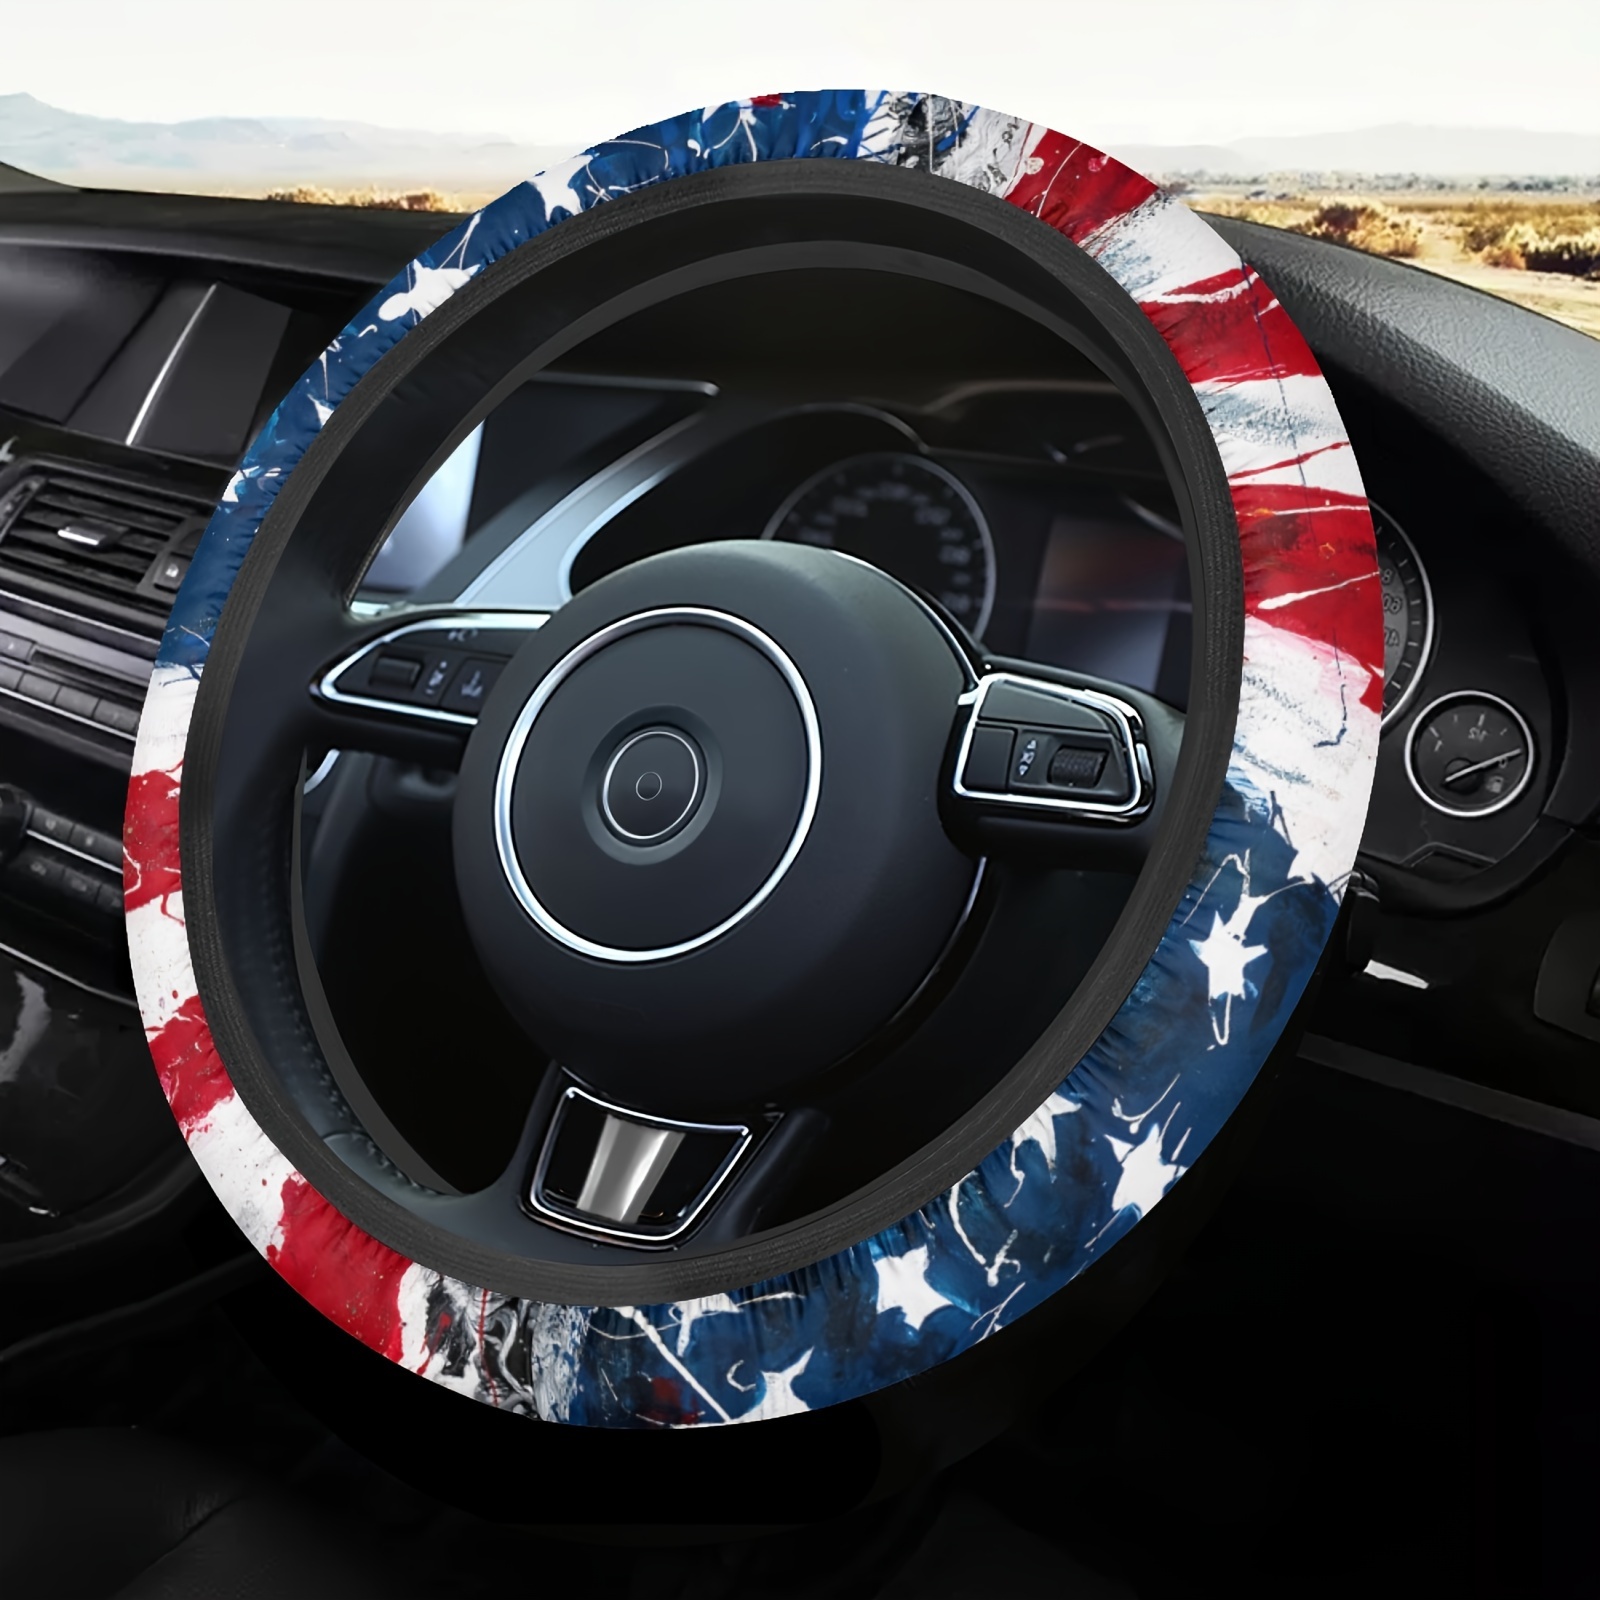 

1pc Vintage Watercolor Paint American Flag Print Car Steering Wheel Covers For Women Men Patriotic 4th Of July Car Interior Accessories